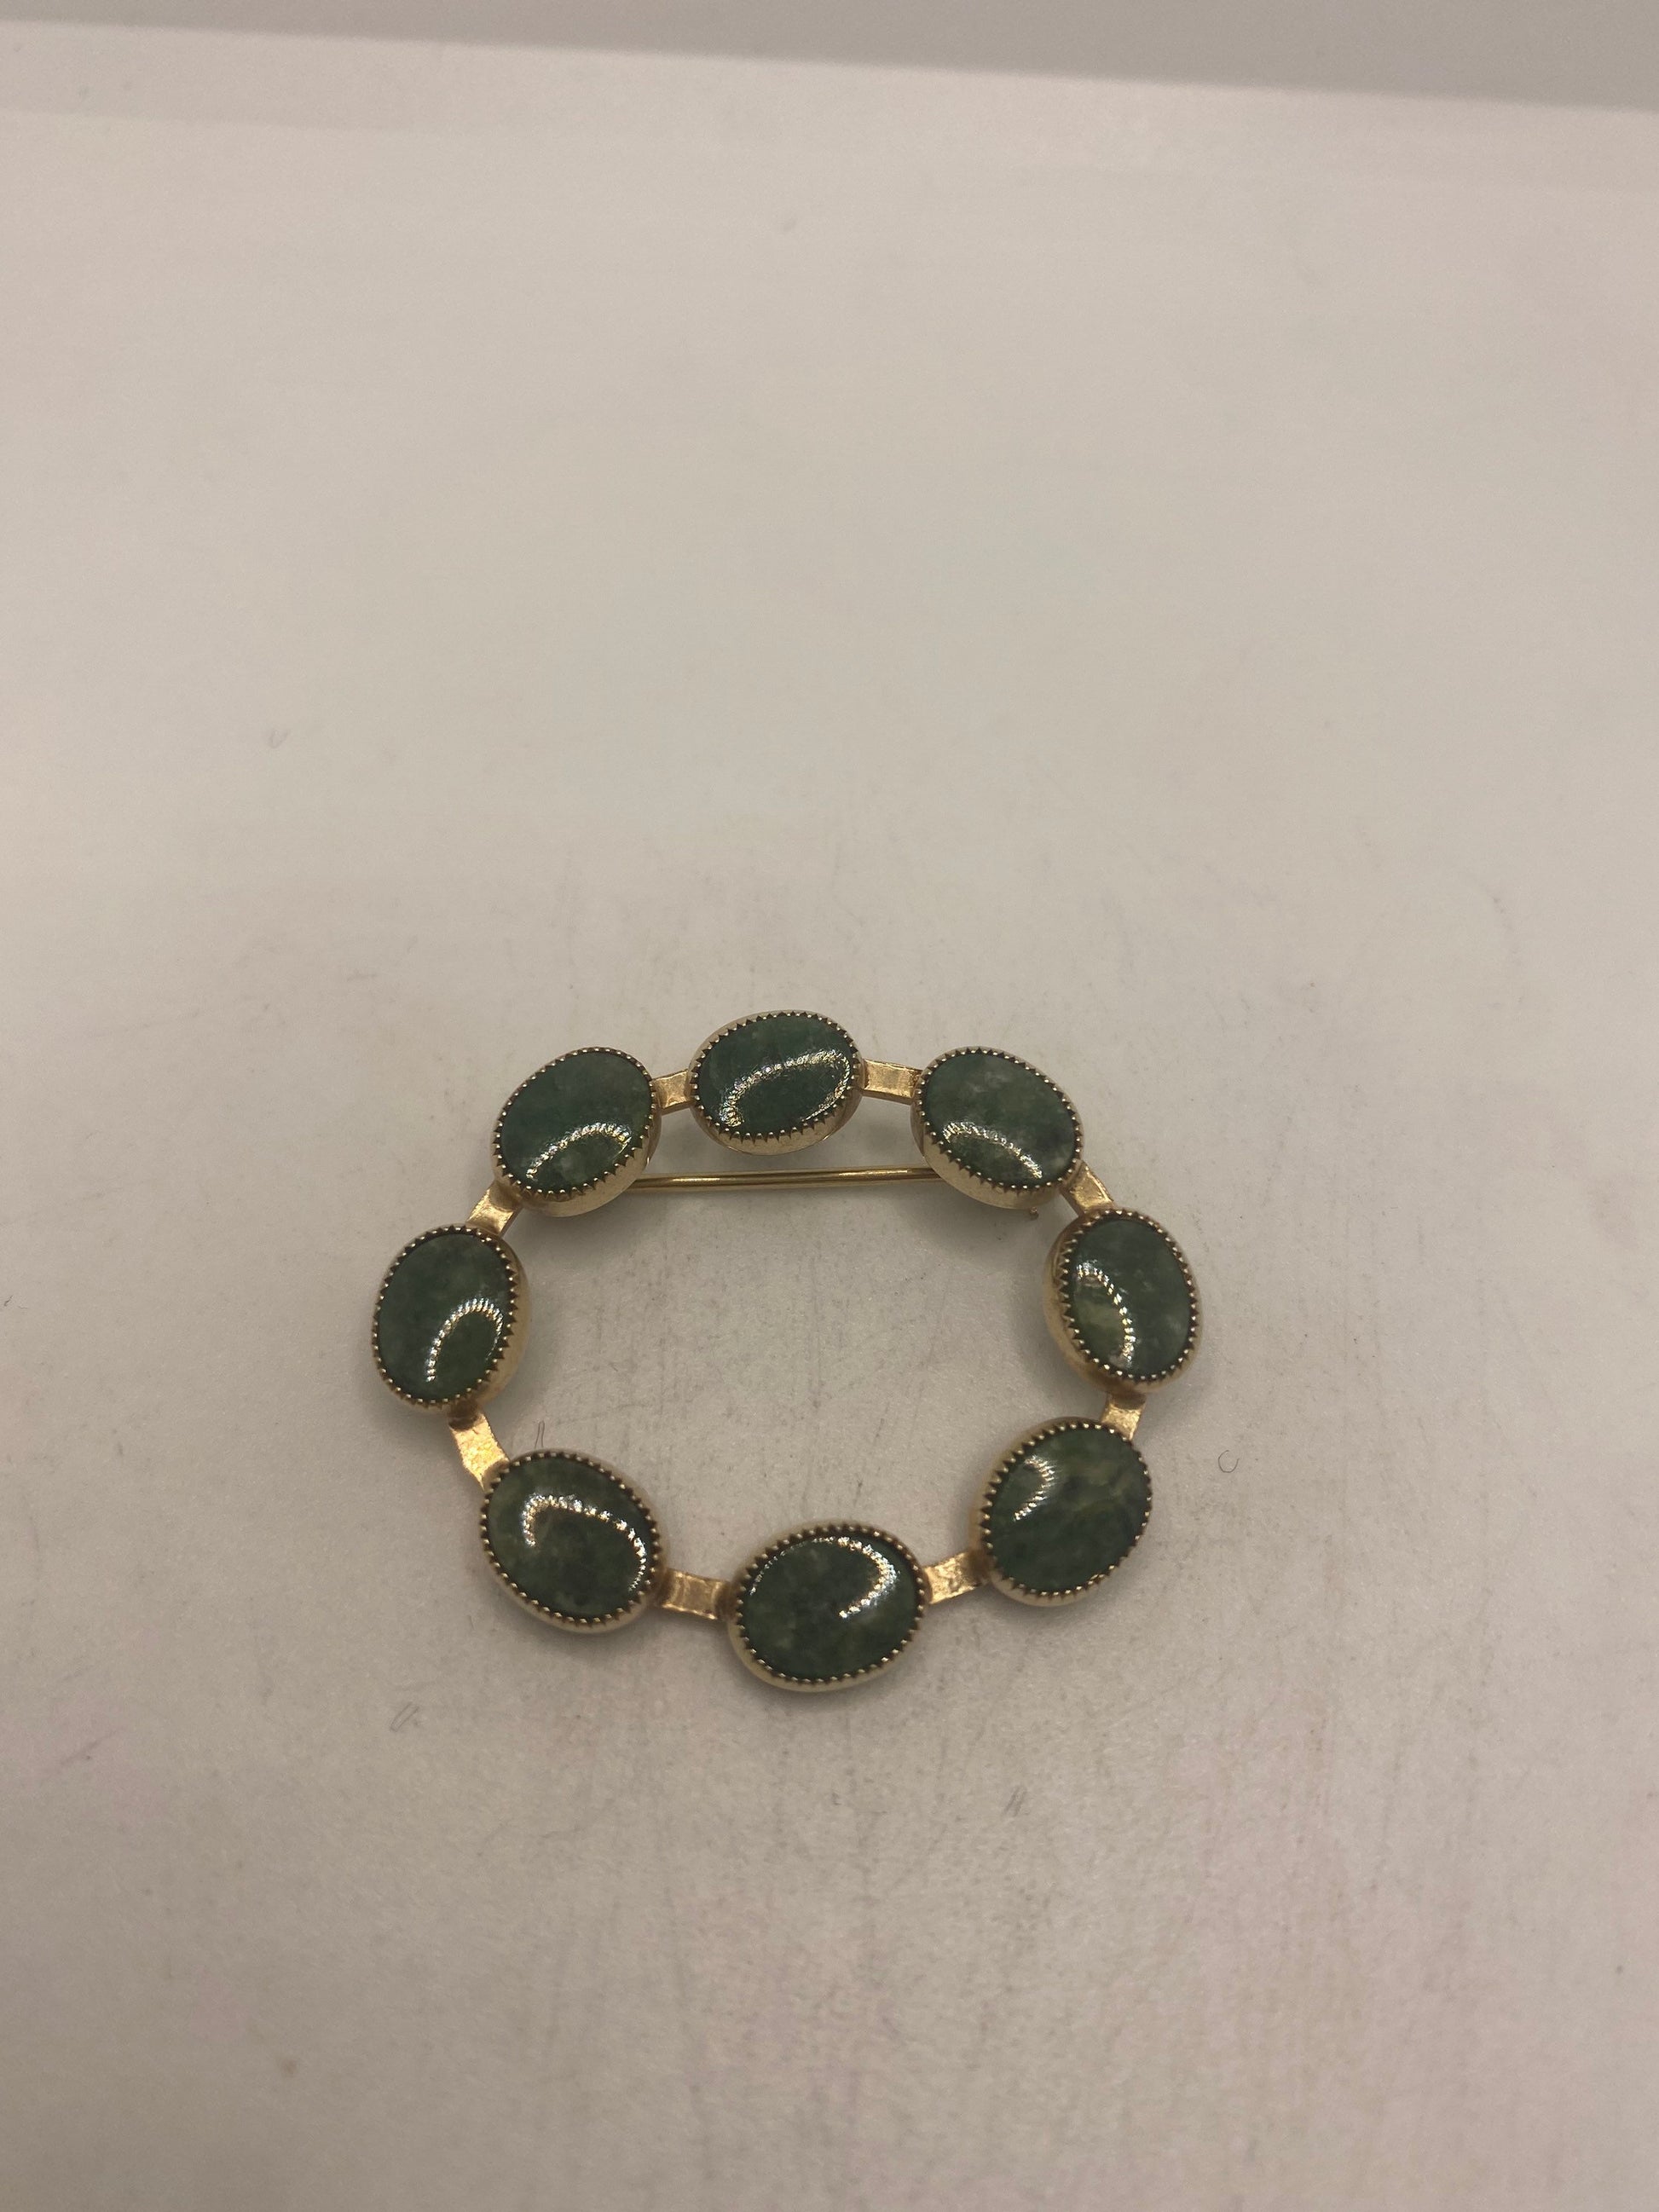 Vintage Green Jade Yellow Gold Filled Brooch Pin